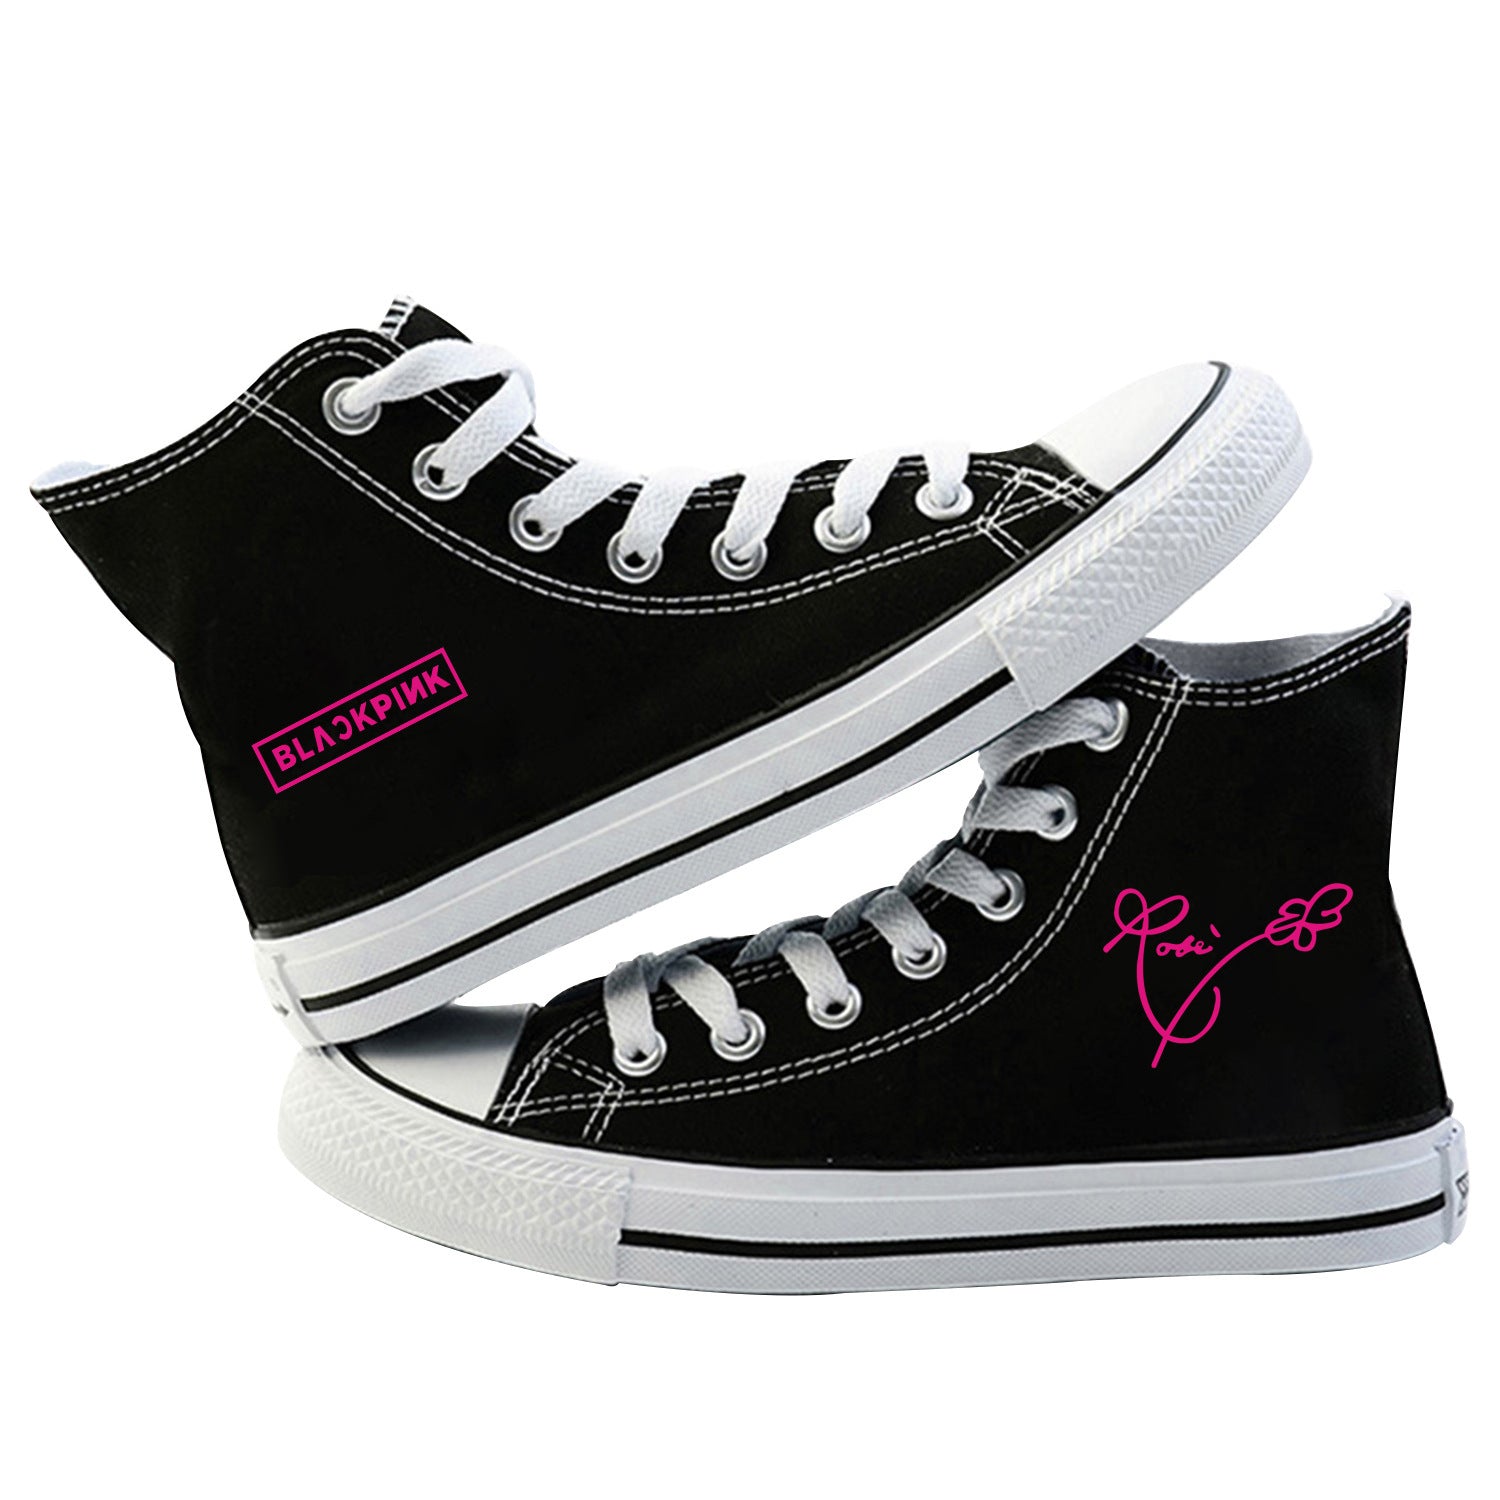 Blackpink Canvas Shoes For Women Causal Wear High Heel Lace Up